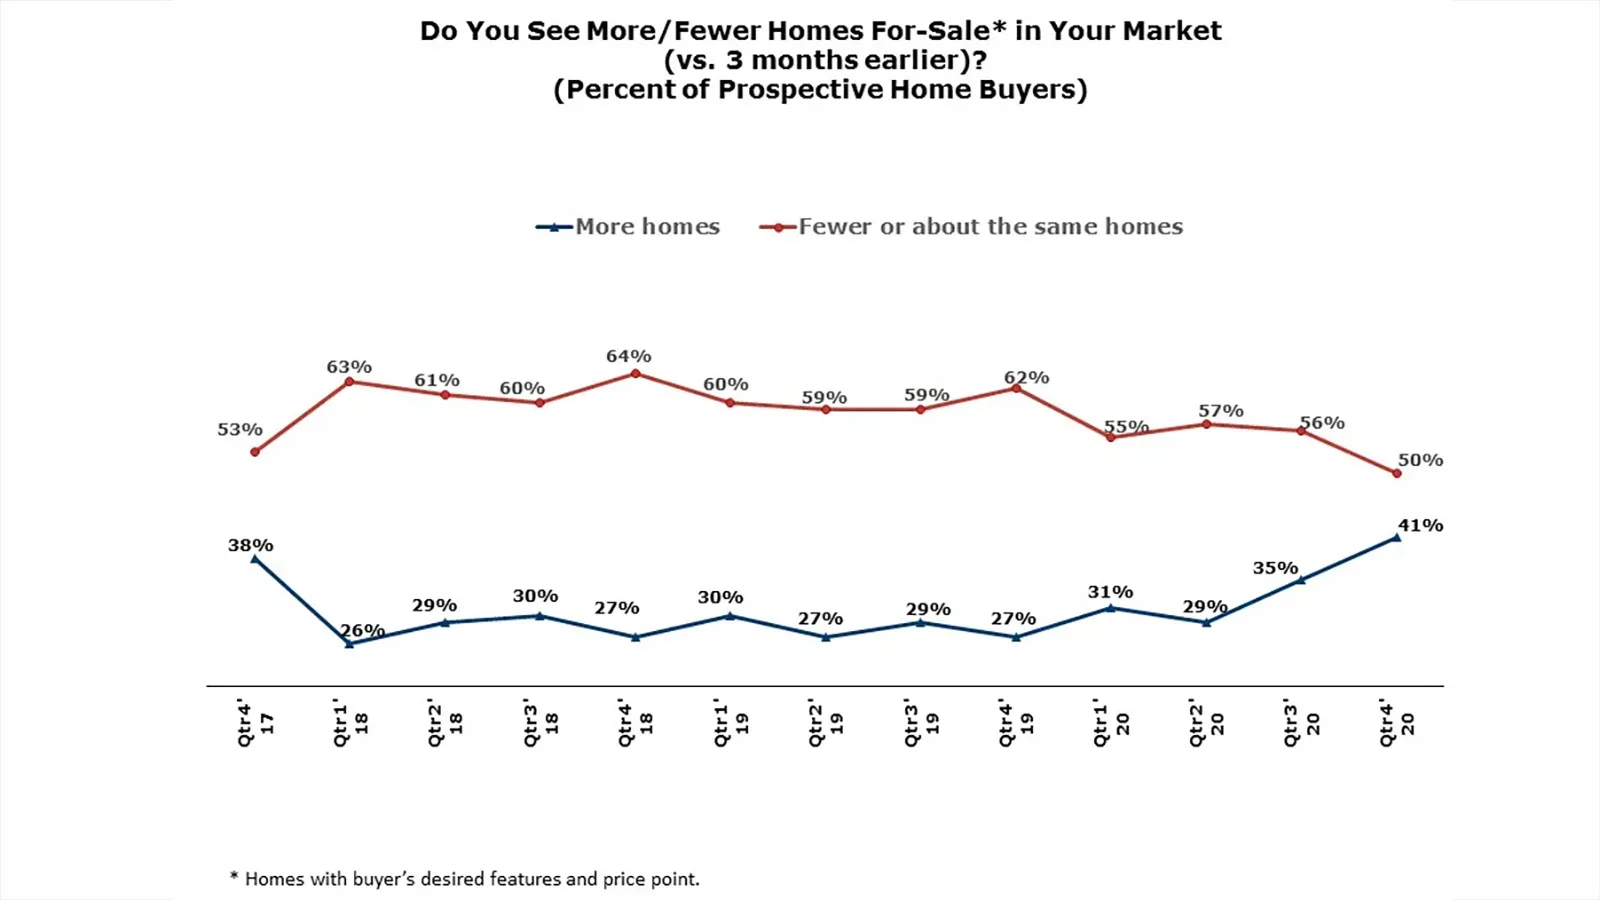 Homes for Sale data